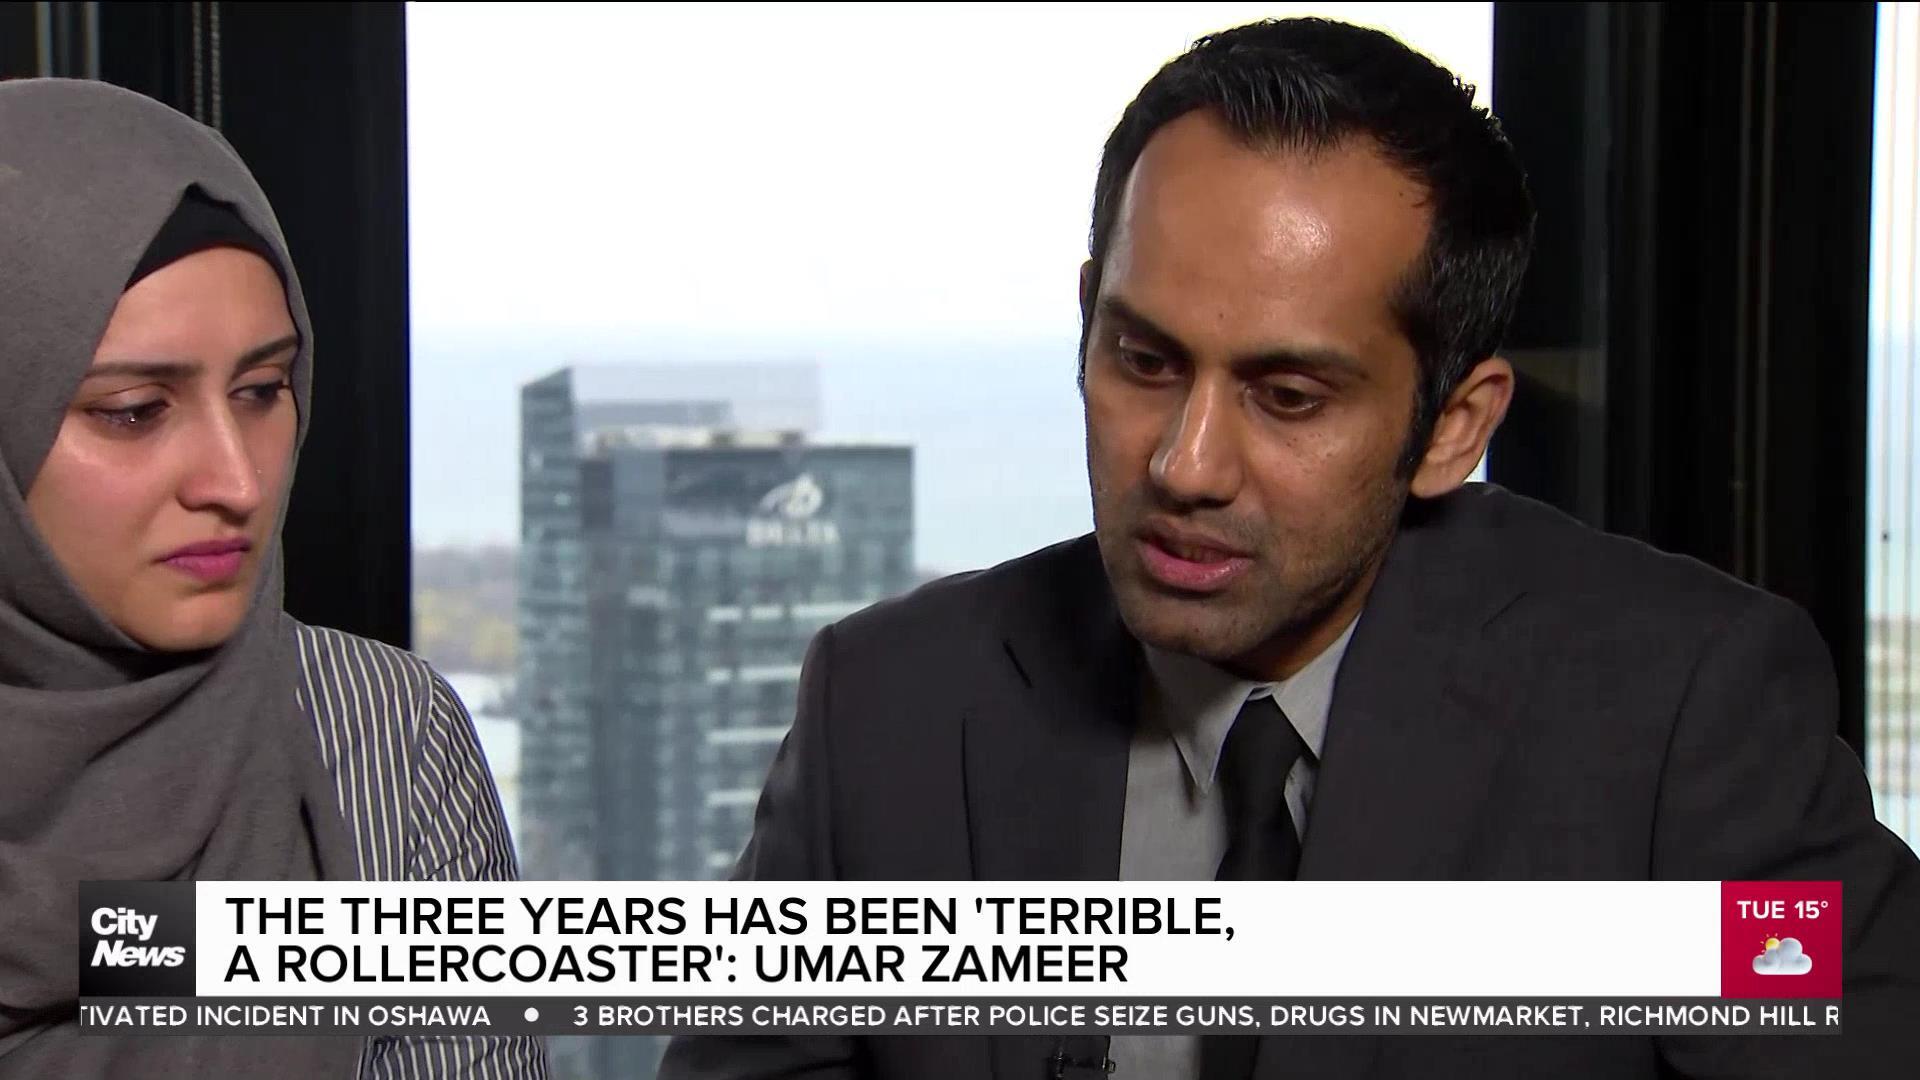 Last three years described as 'terrible' and 'a rollercoaster' for Umar Zameer